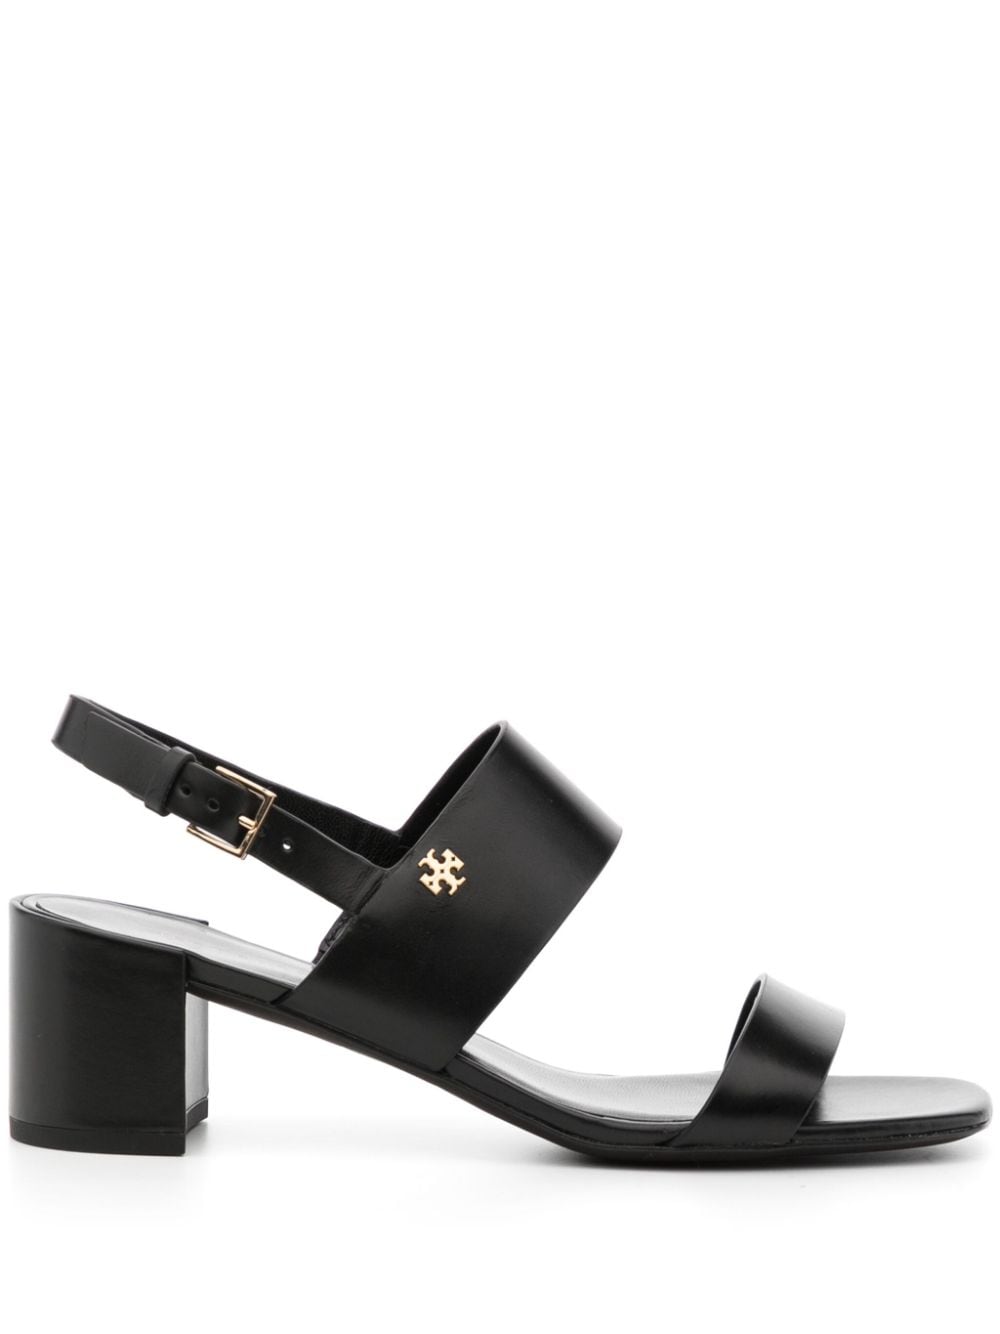 Tory Burch Double T 50mm leather sandals - Black von Tory Burch